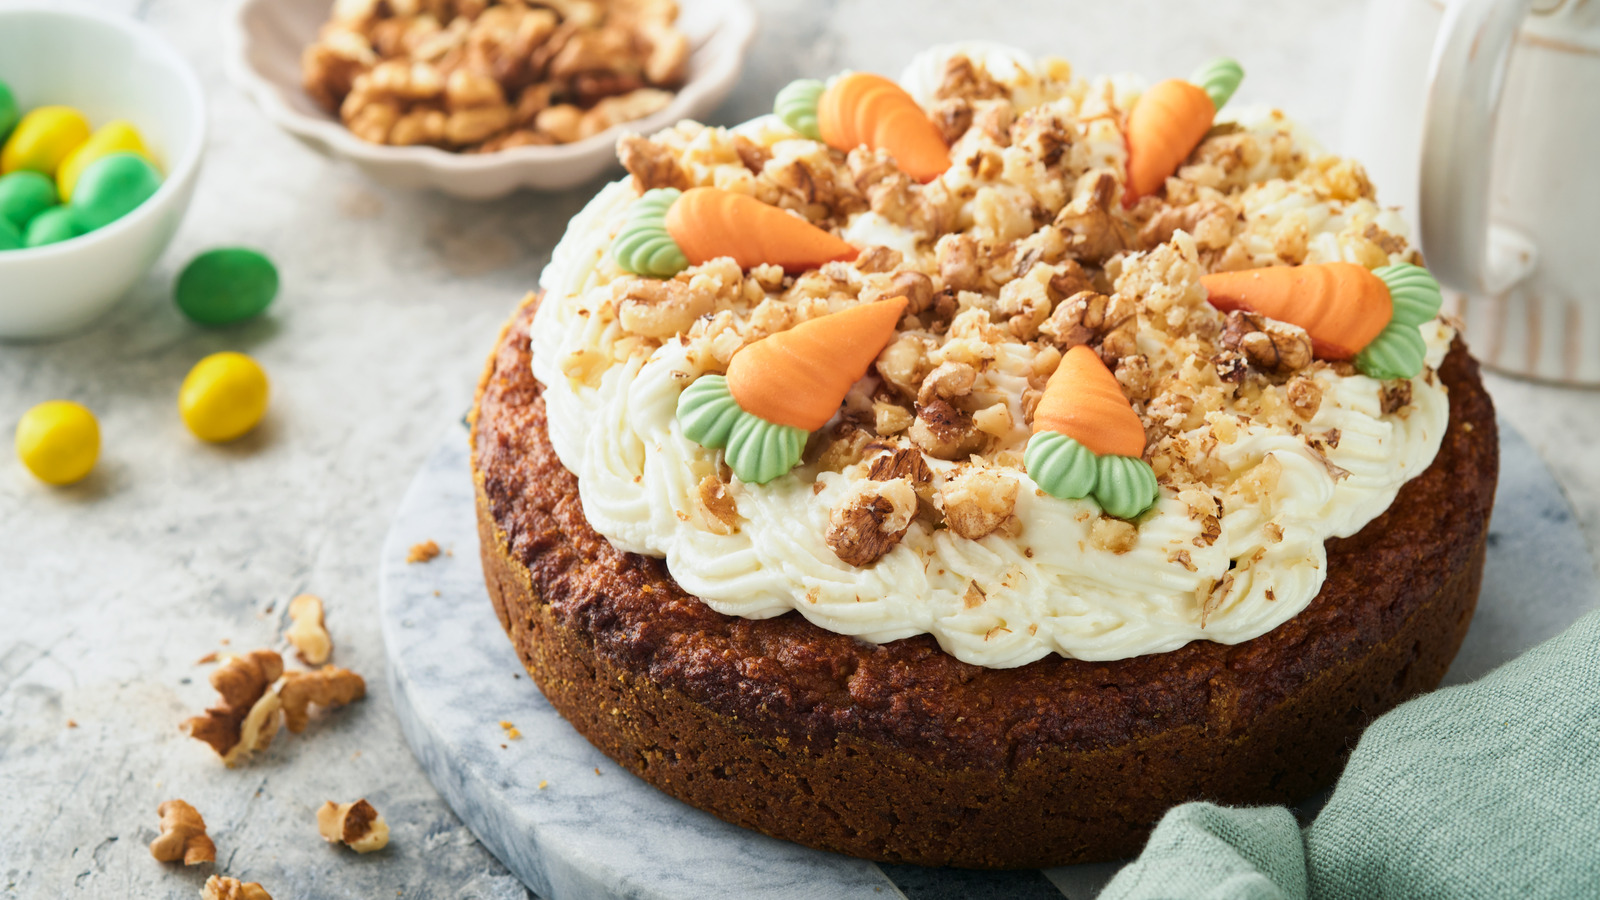 Classic Carrot Cake Recipe by Tasty